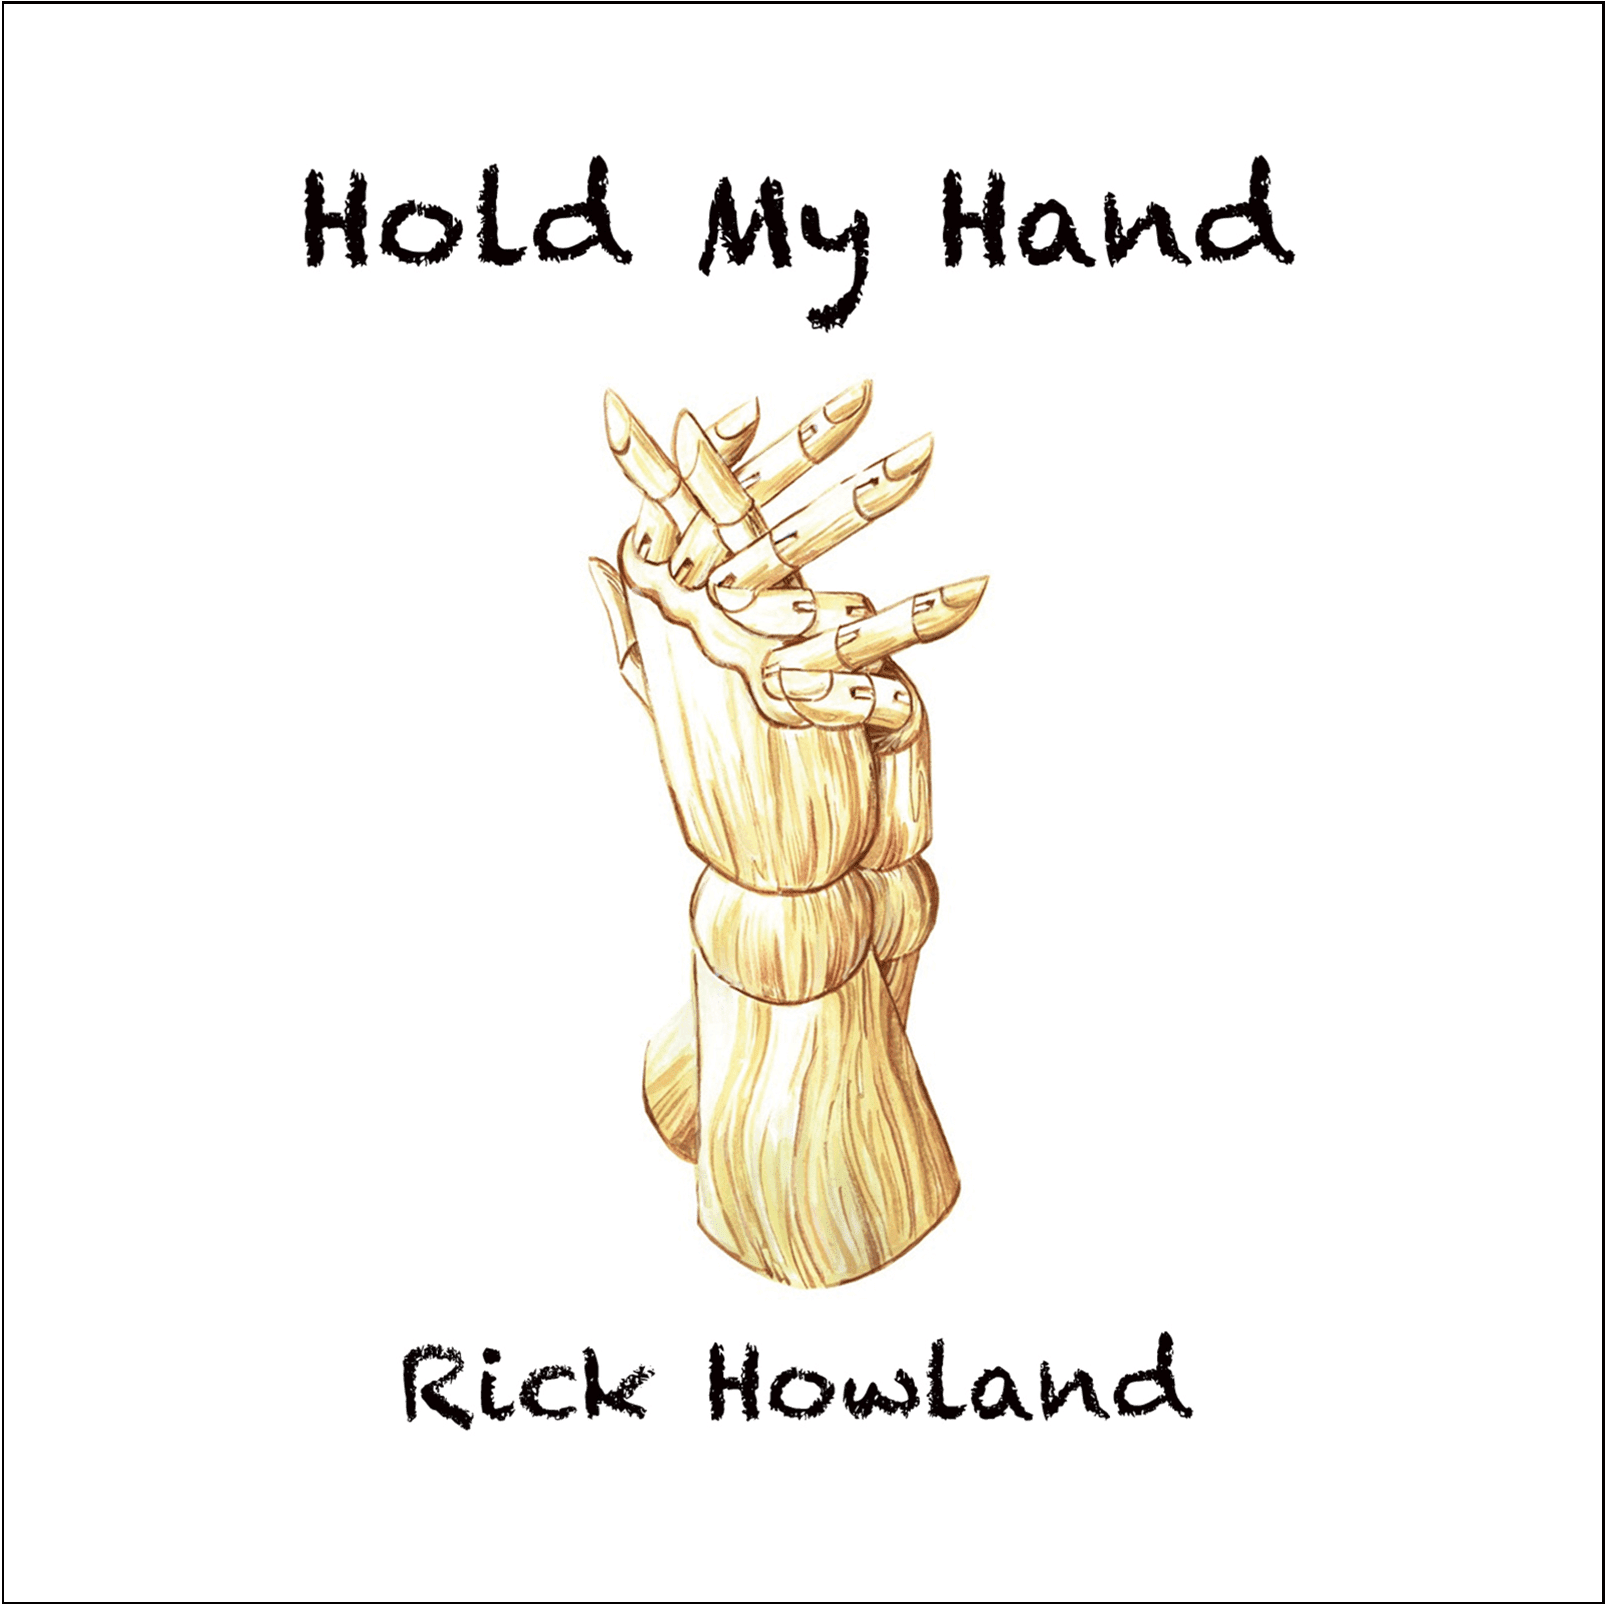 Hold My Hand Album Cover